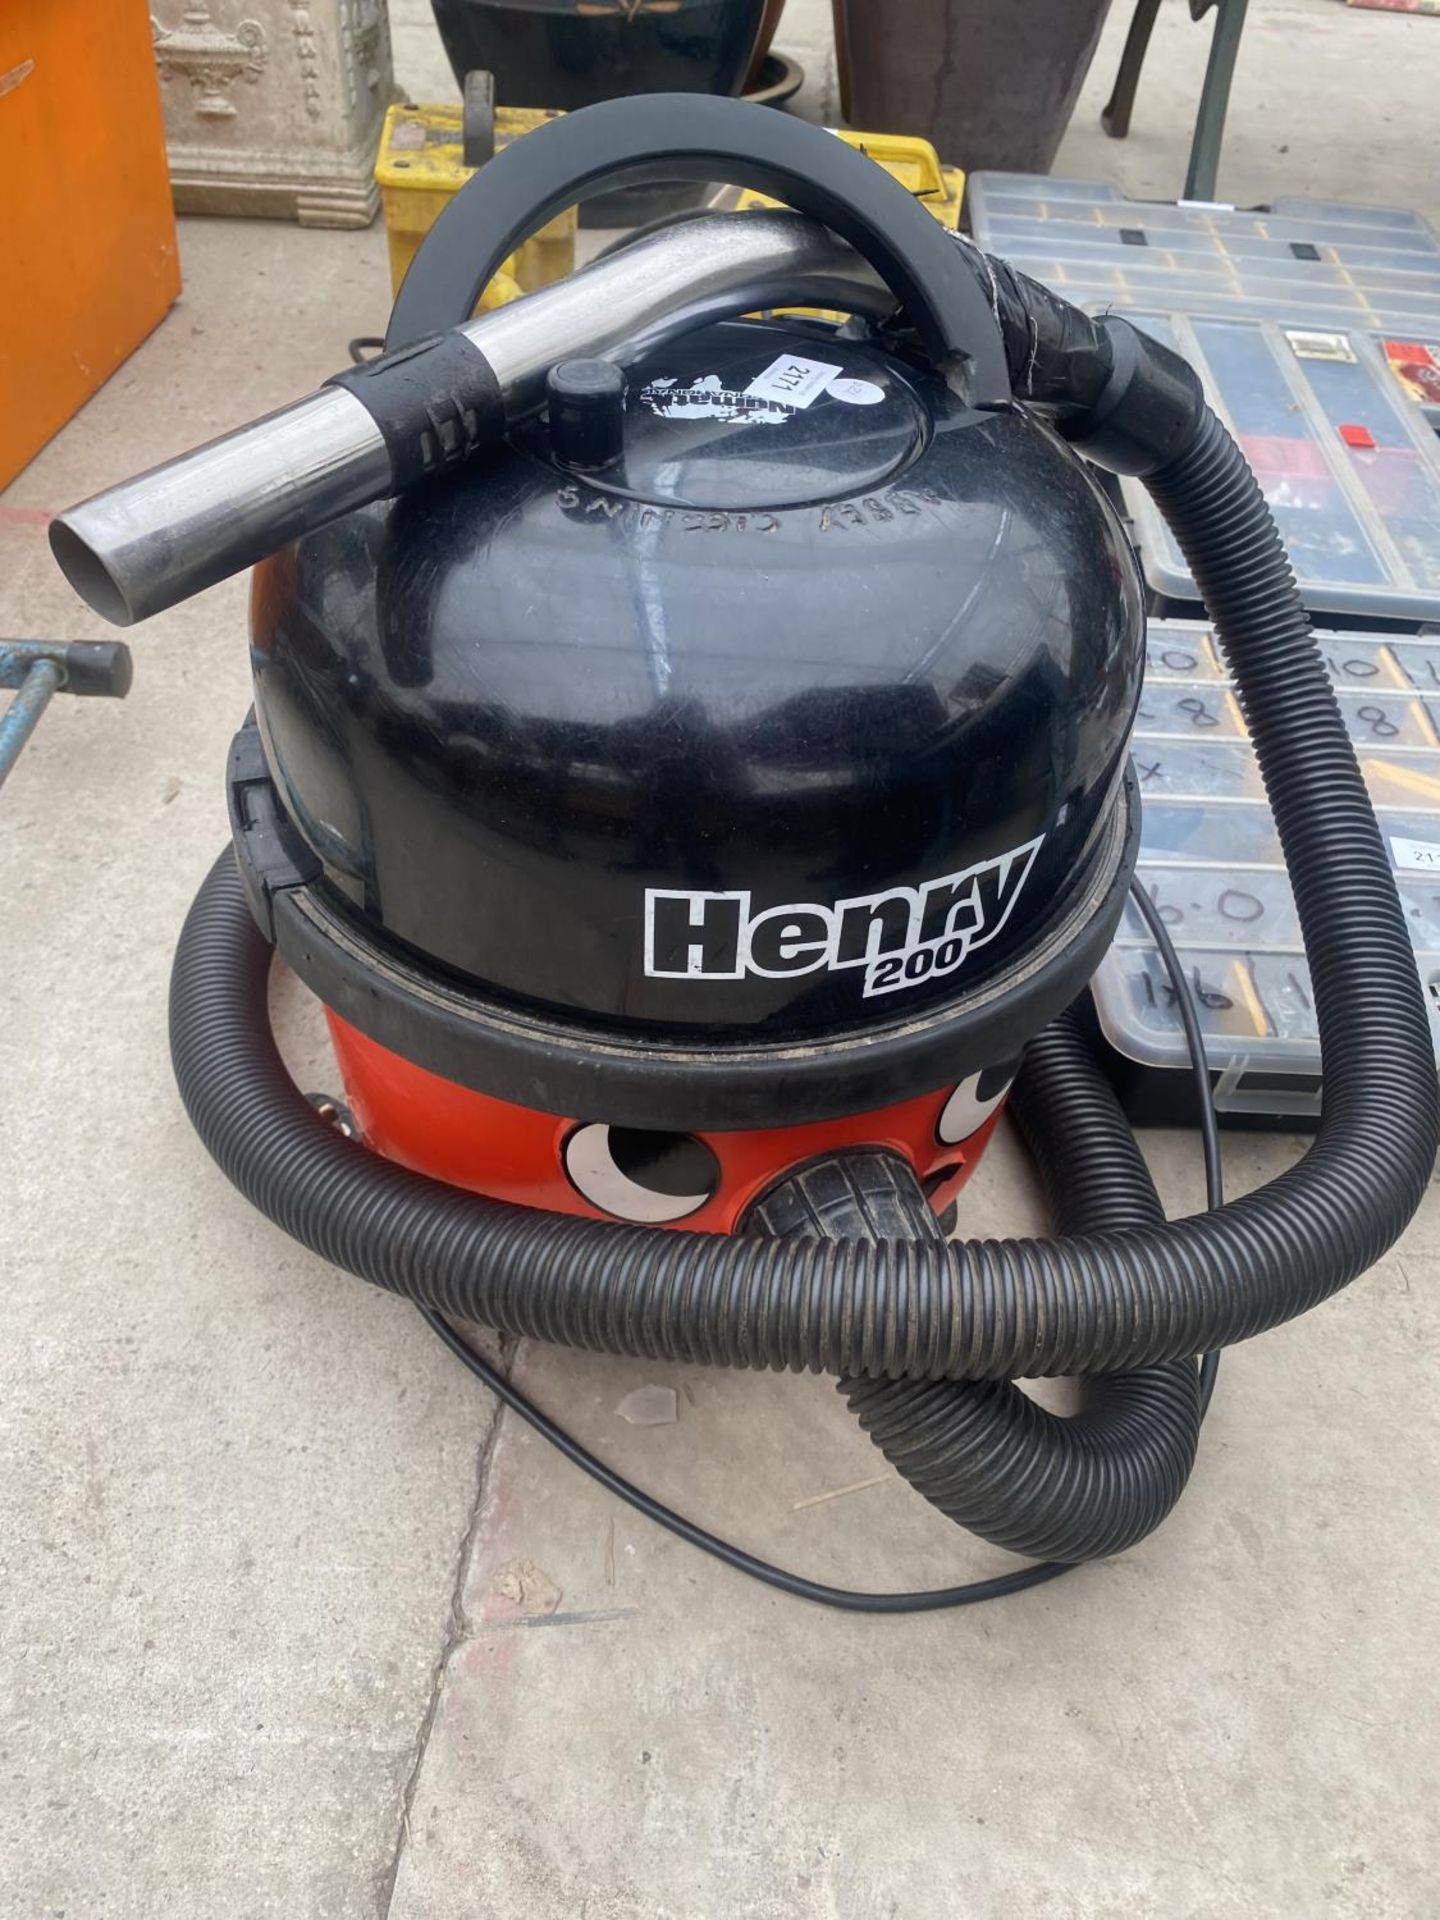 A HENRY 200 HOOVER